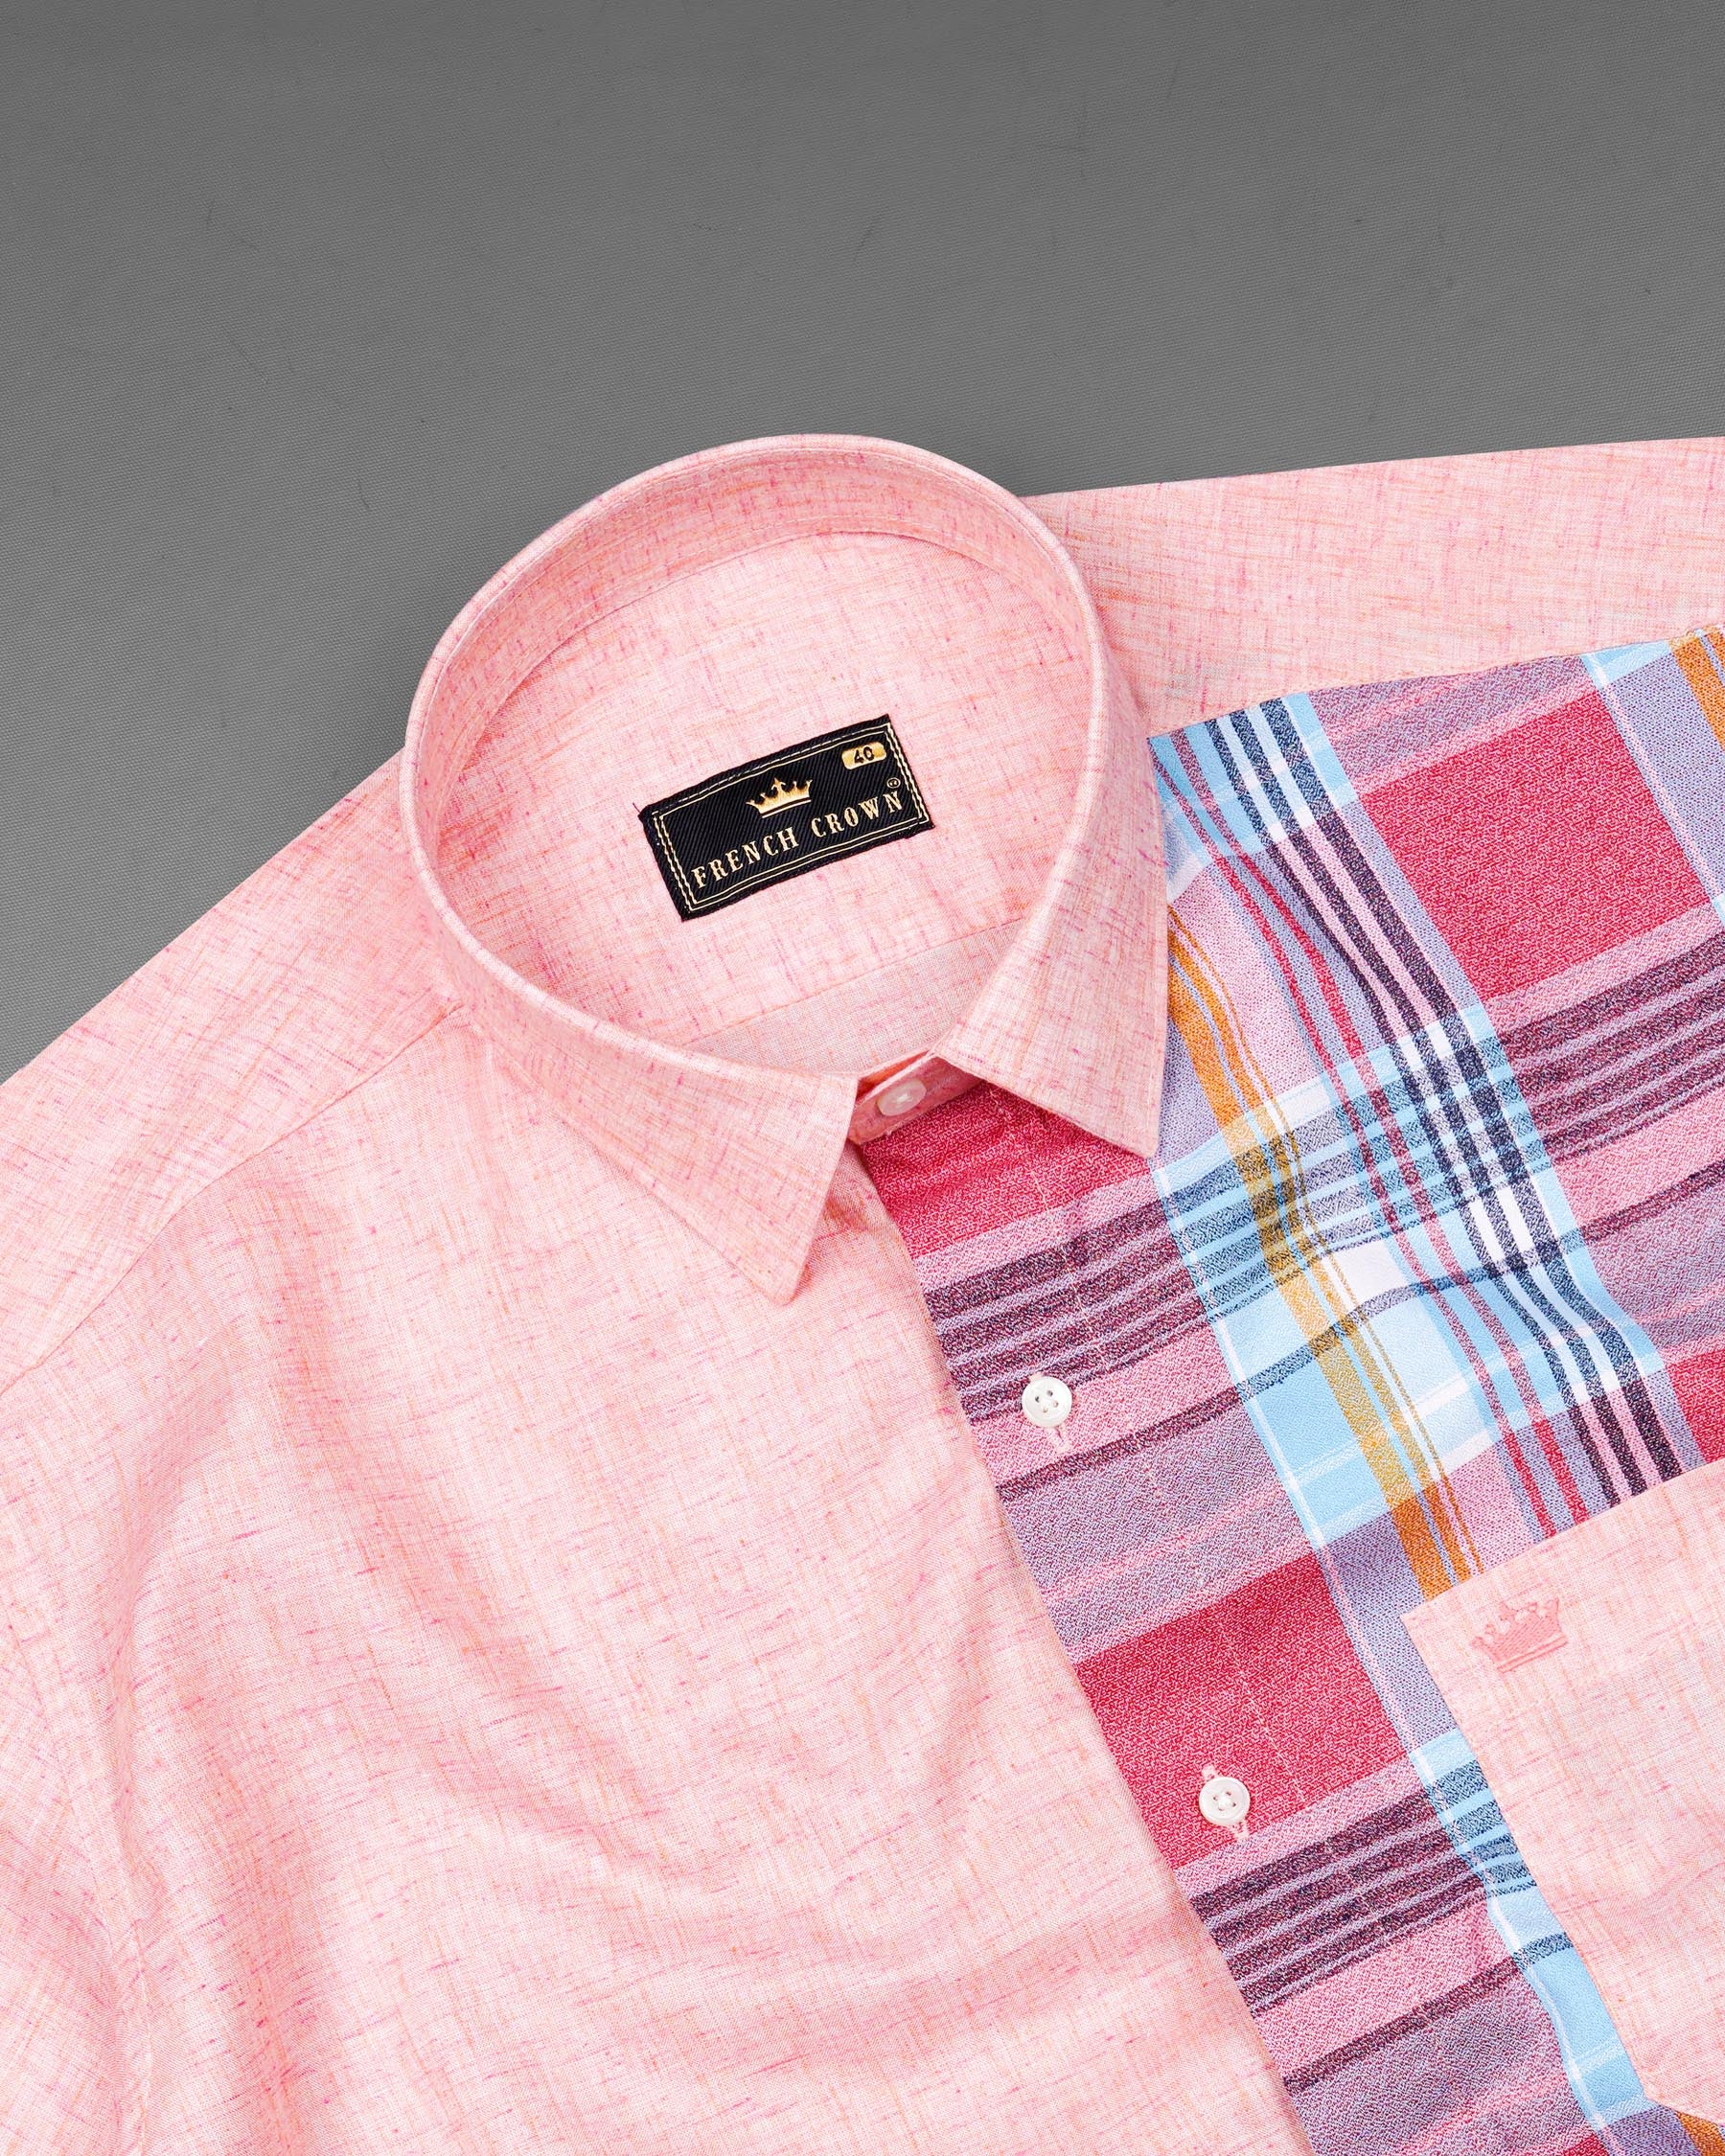 Cosmos Pink and Froly Pink Dobby Textured Premium Giza Cotton Designer Shirt 7717-P189-38, 7717-P189-H-38, 7717-P189-39,7717-P189-H-39, 7717-P189-40, 7717-P189-H-40, 7717-P189-42, 7717-P189-H-42, 7717-P189-44, 7717-P189-H-44, 7717-P189-46, 7717-P189-H-46, 7717-P189-48, 7717-P189-H-48, 7717-P189-50, 7717-P189-H-50, 7717-P189-52, 7717-P189-H-52